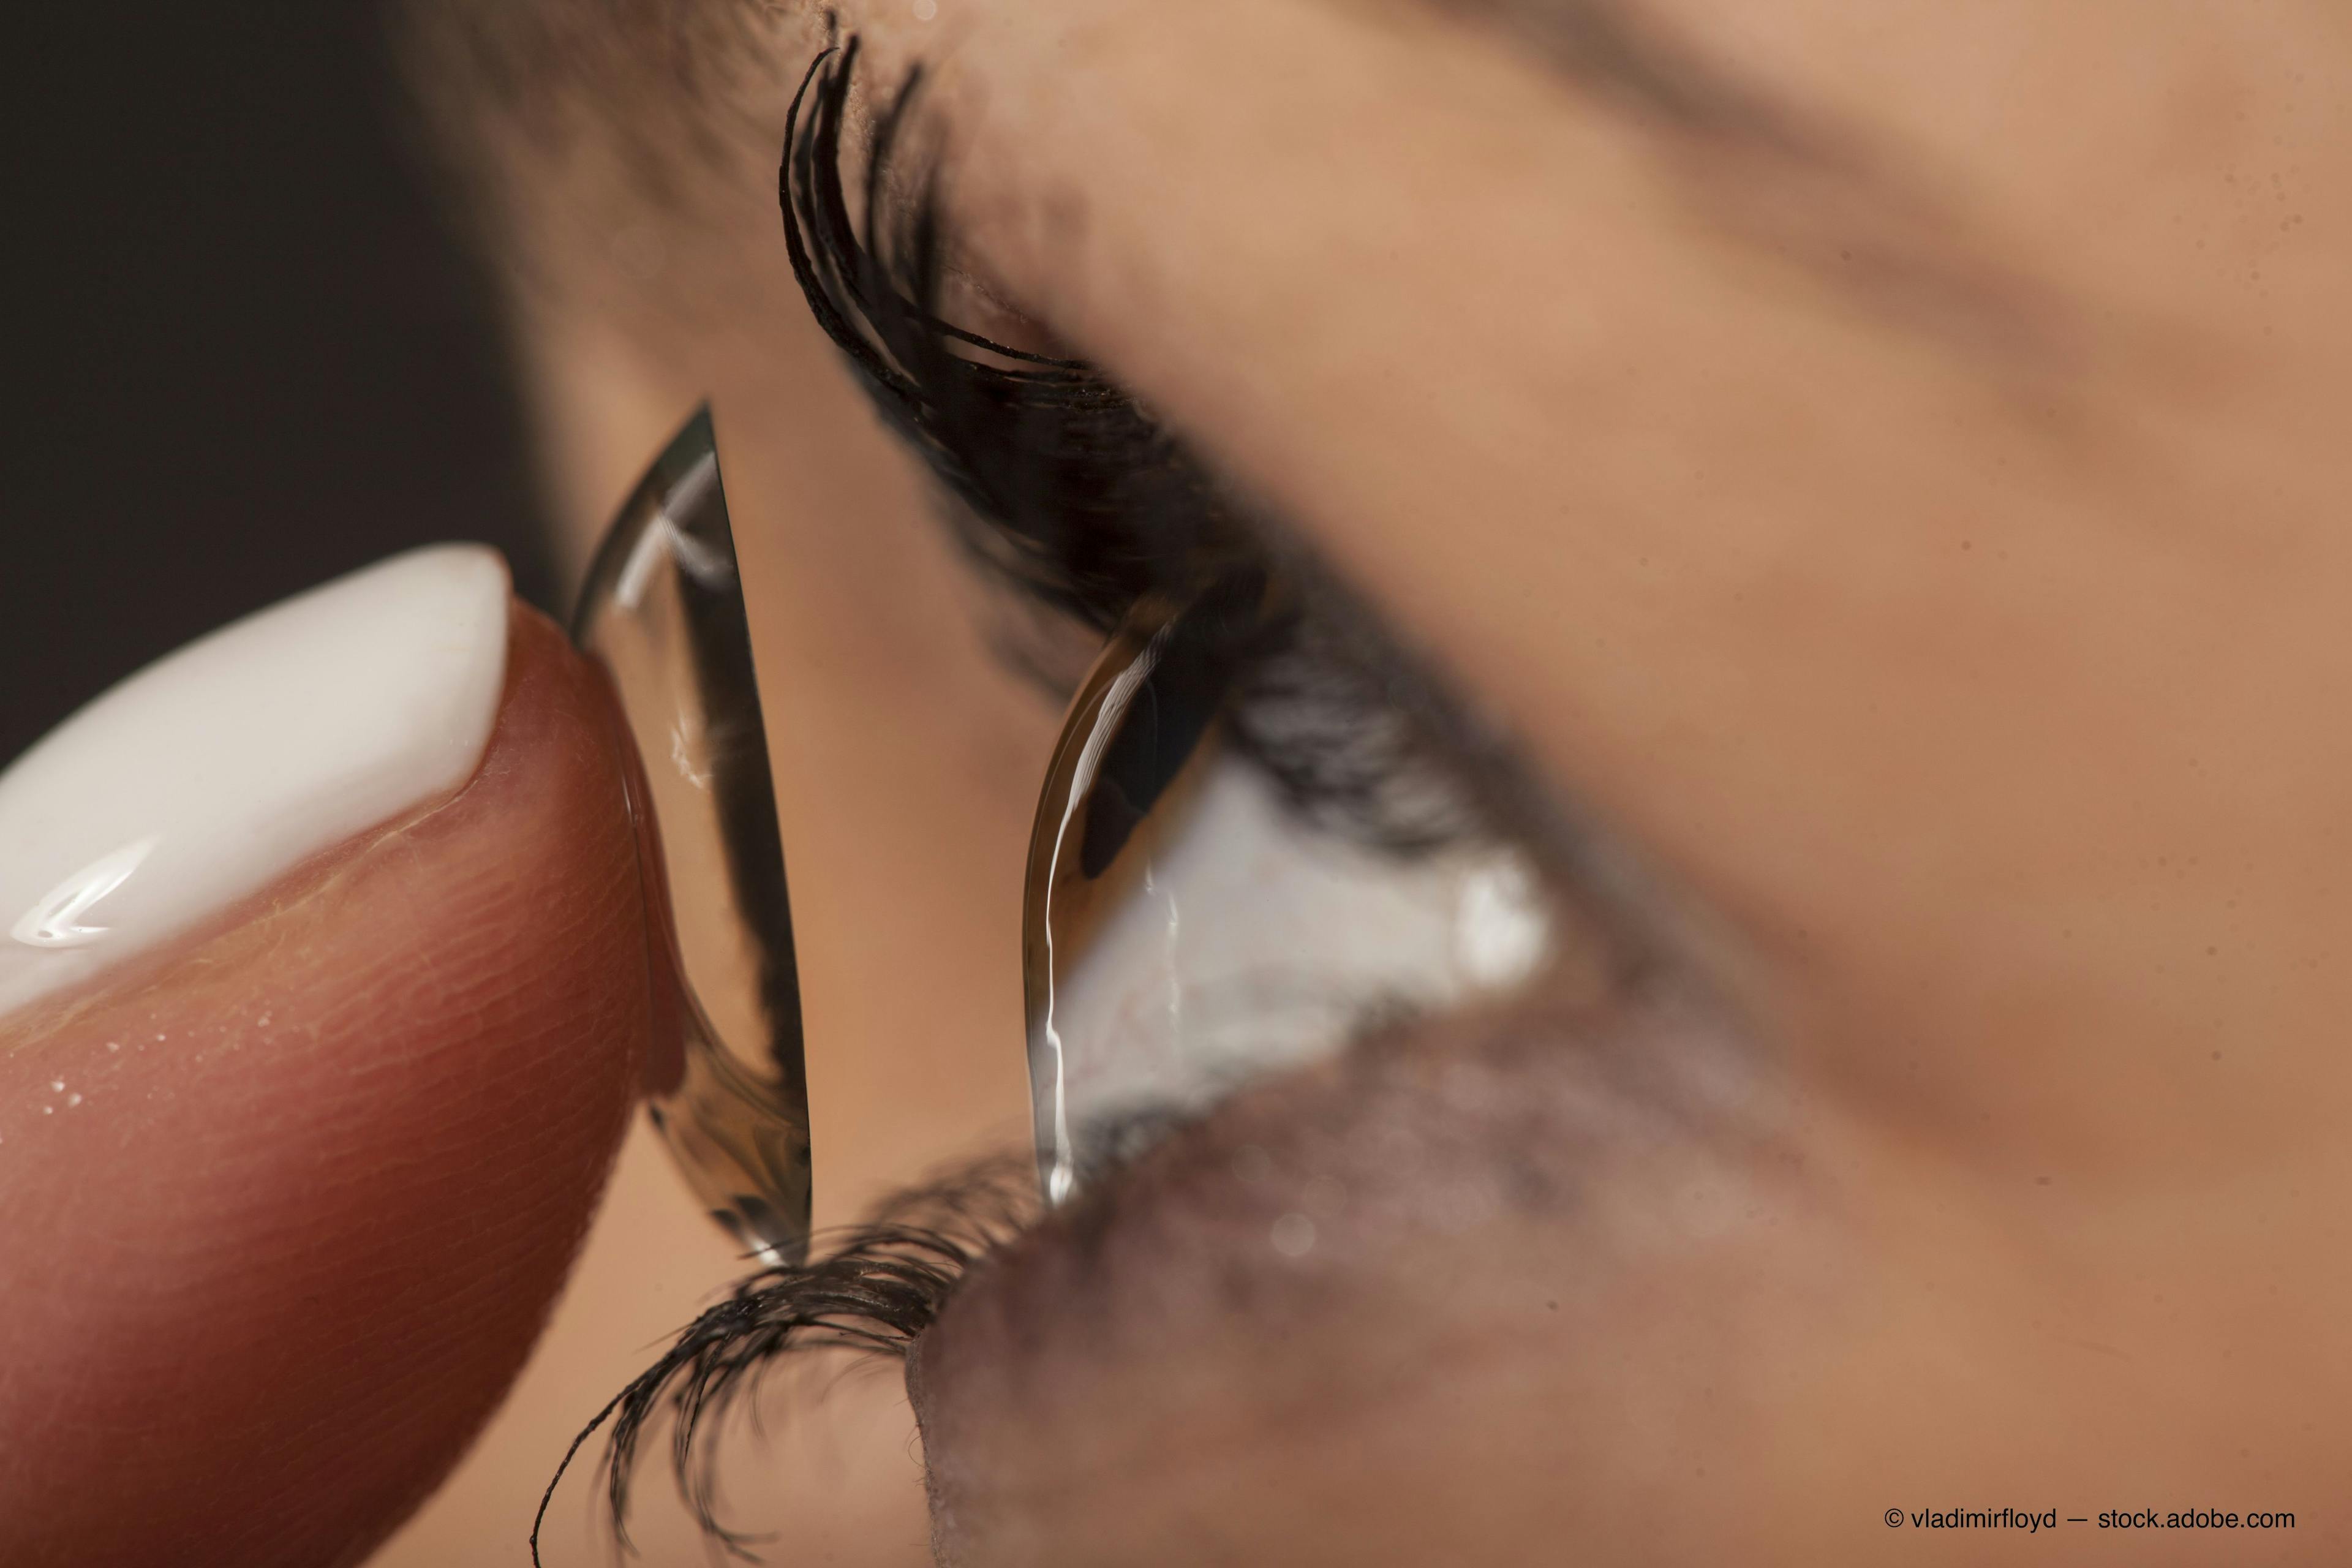 Five ways to stand out with specialty contact lenses